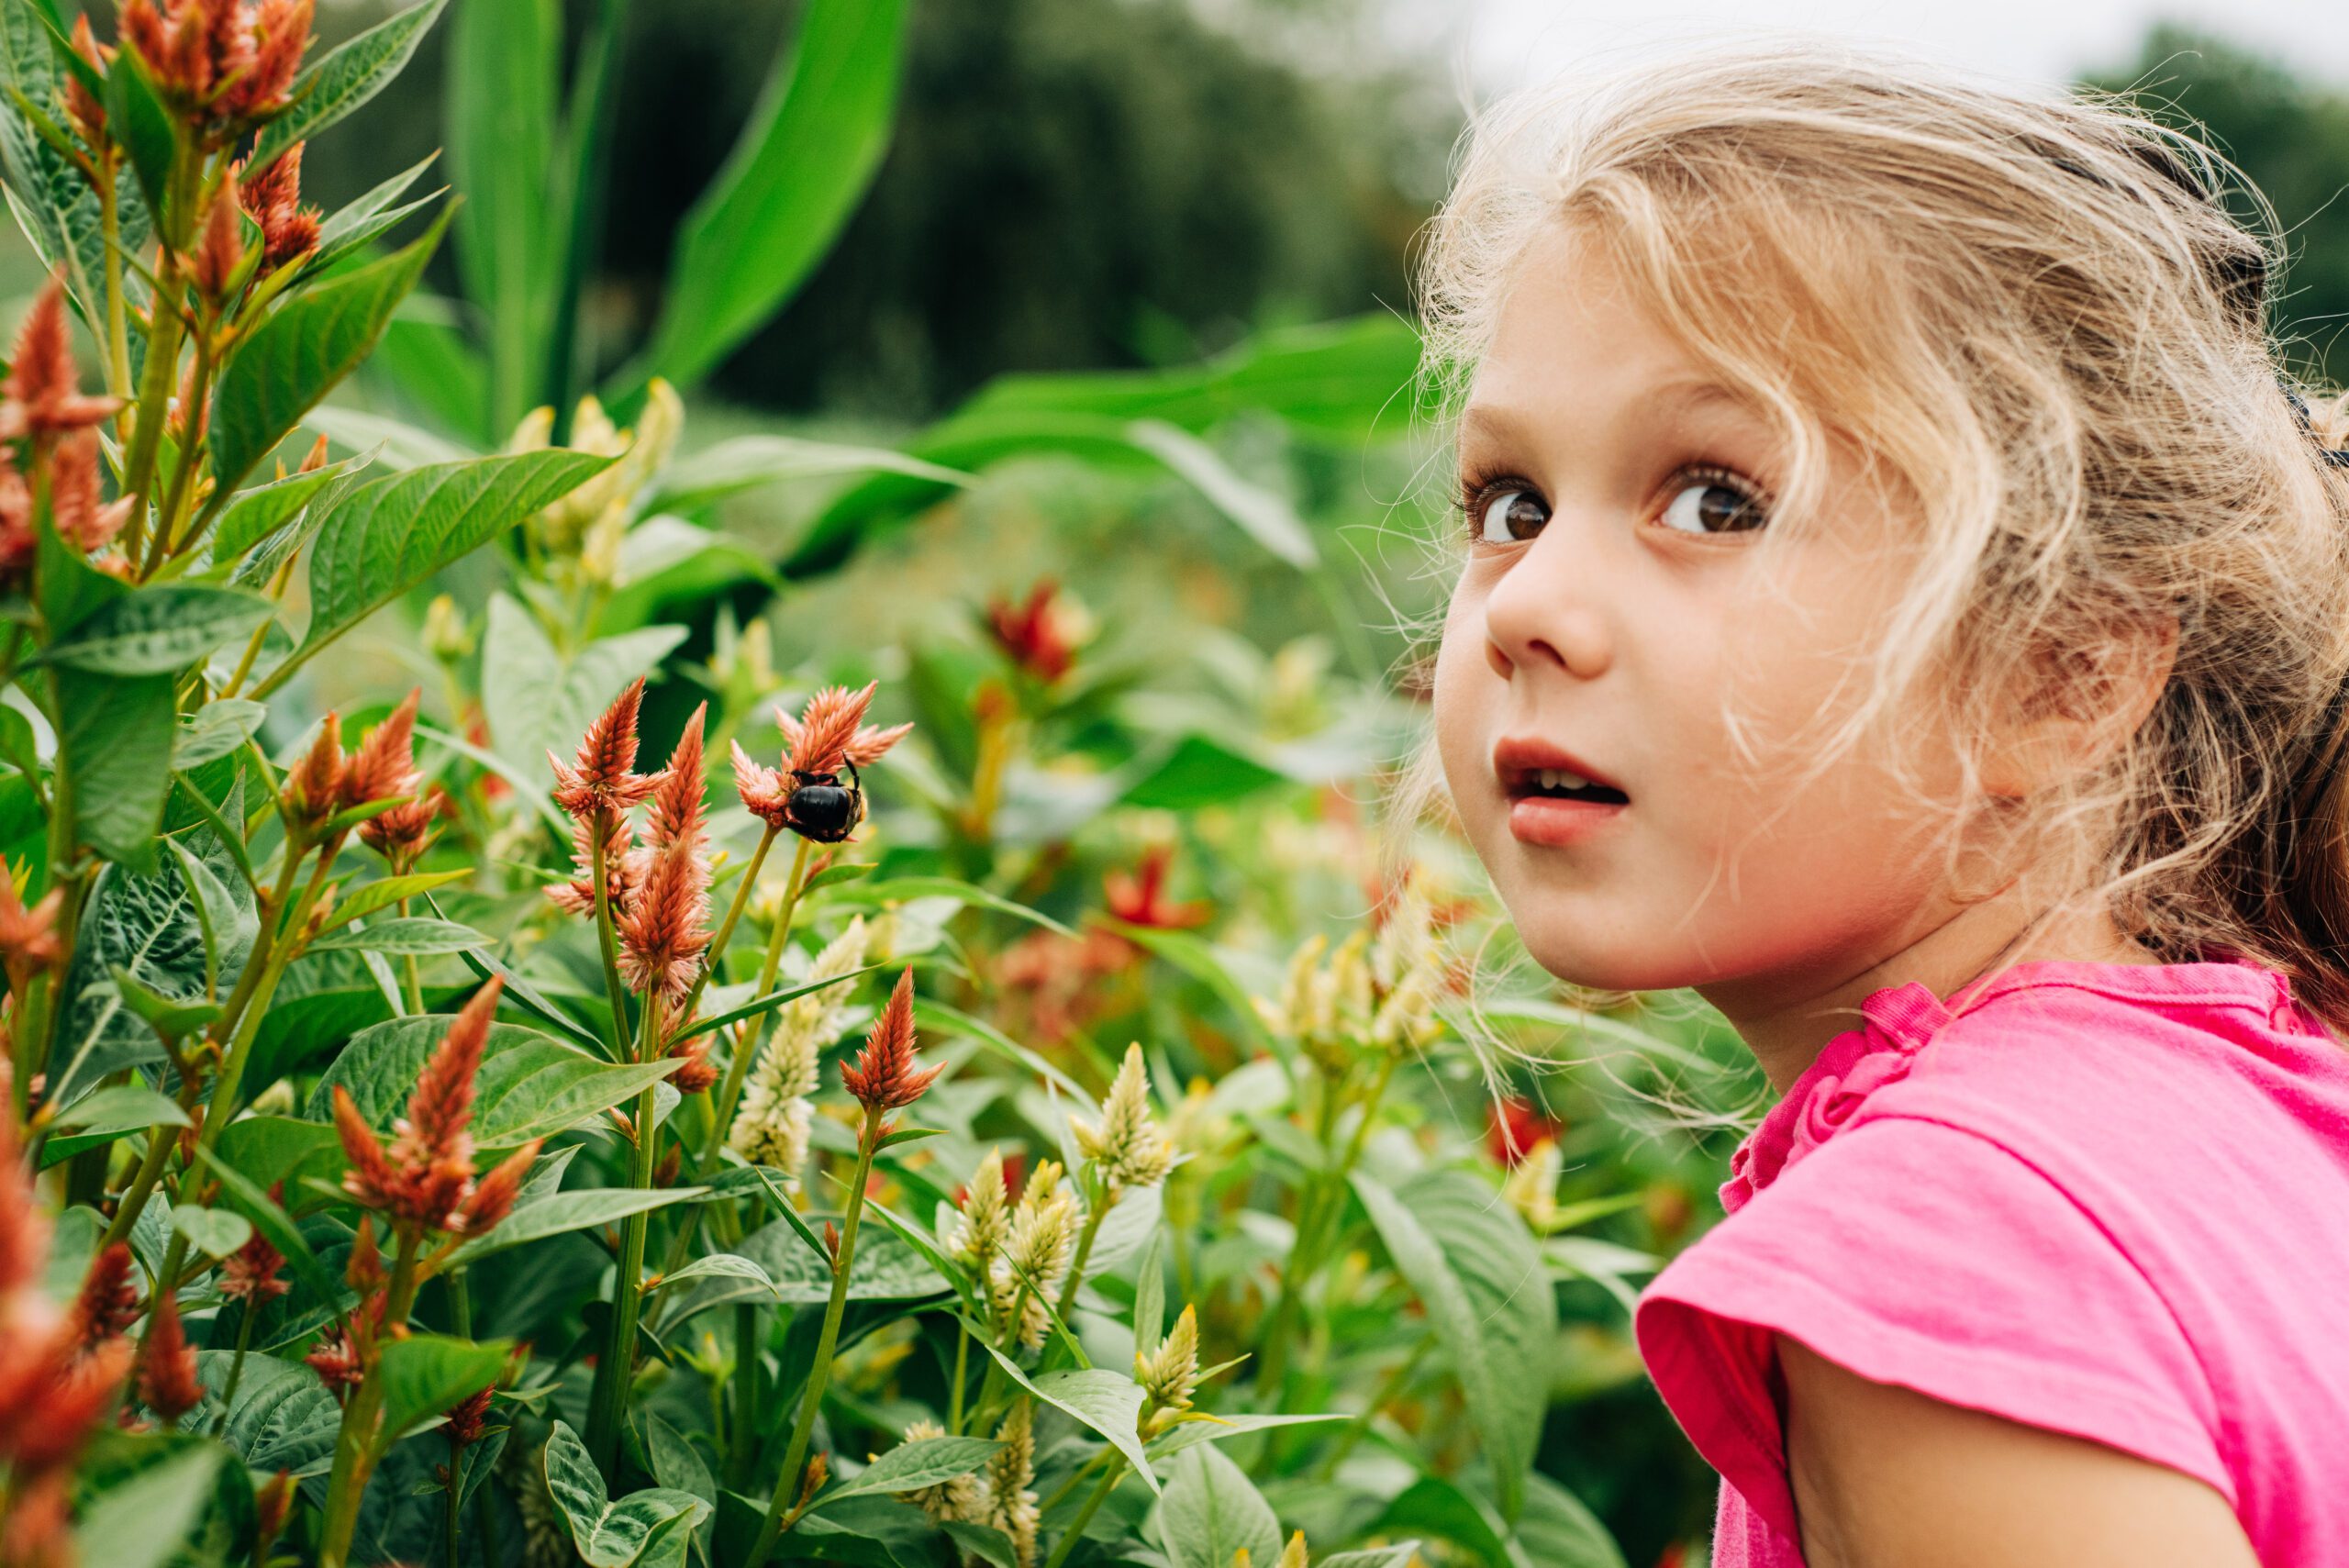 a young girl exploring the spring and summer flowers in a field of coxcomb as she looks up toward the camera with wonder 